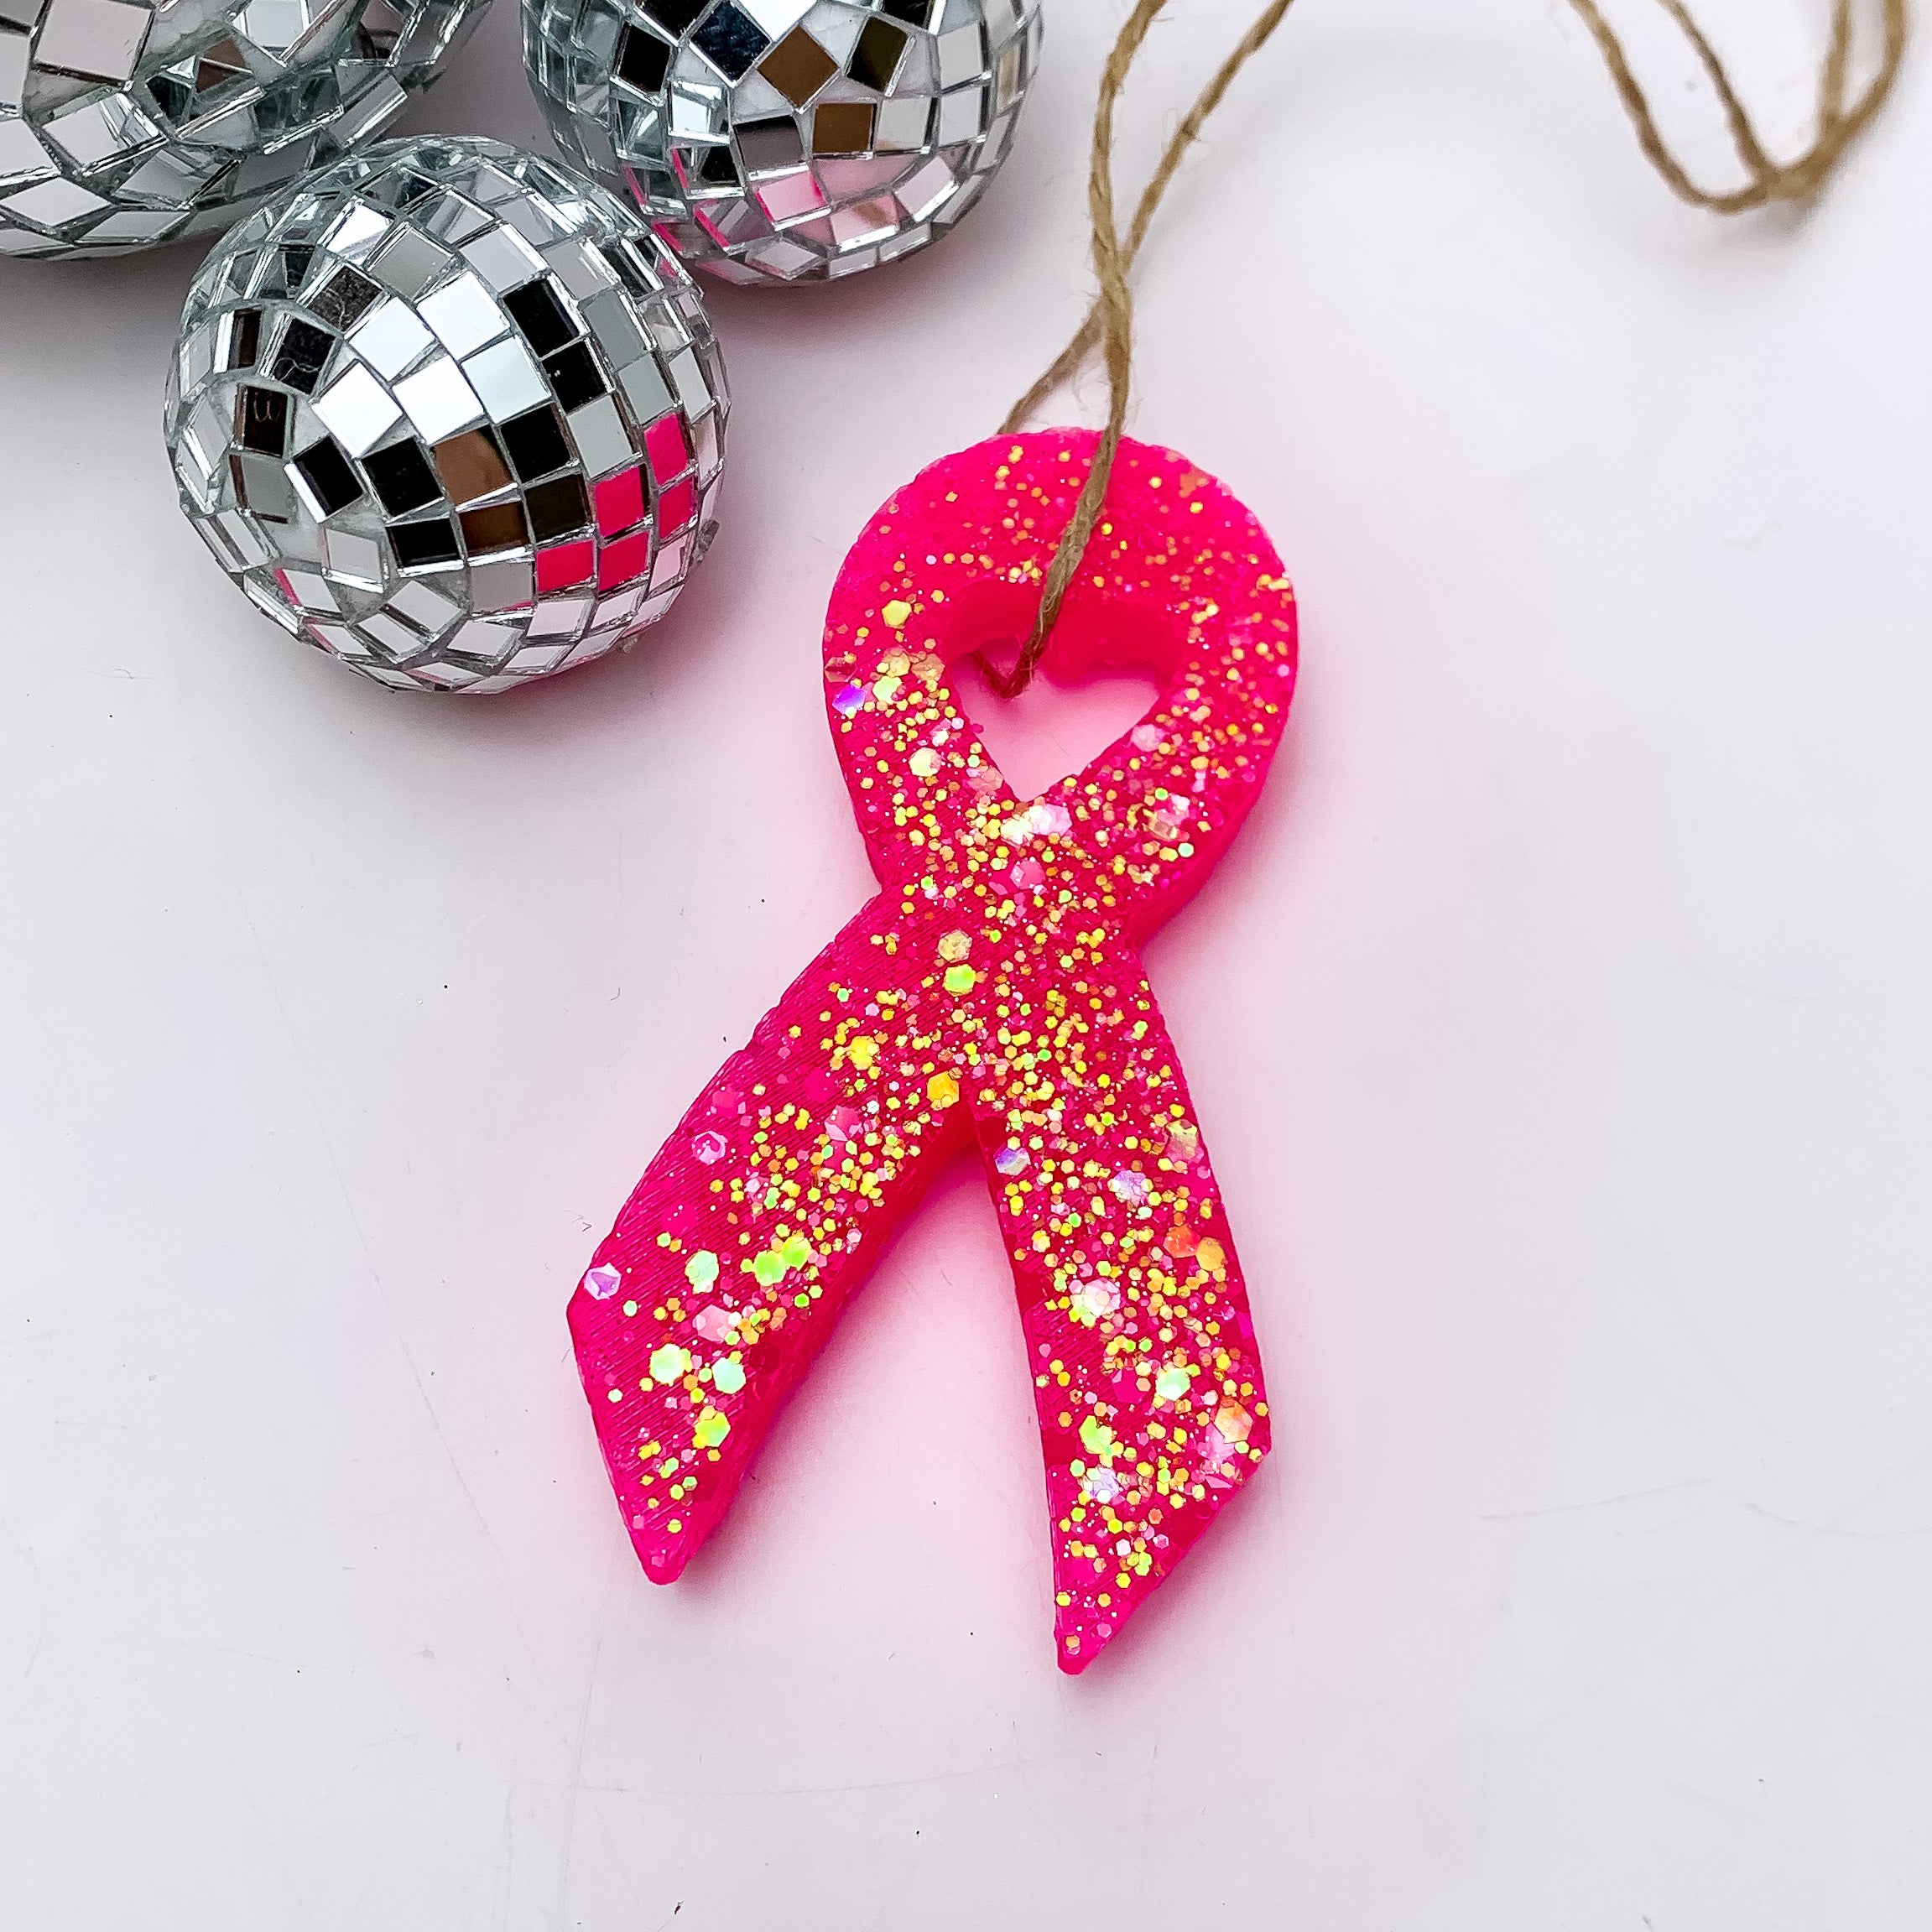 Hot Pink Breast Cancer Ribbon Freshie in Assorted Scents. This freshie is pictured on a white background with disco balls in the corner.